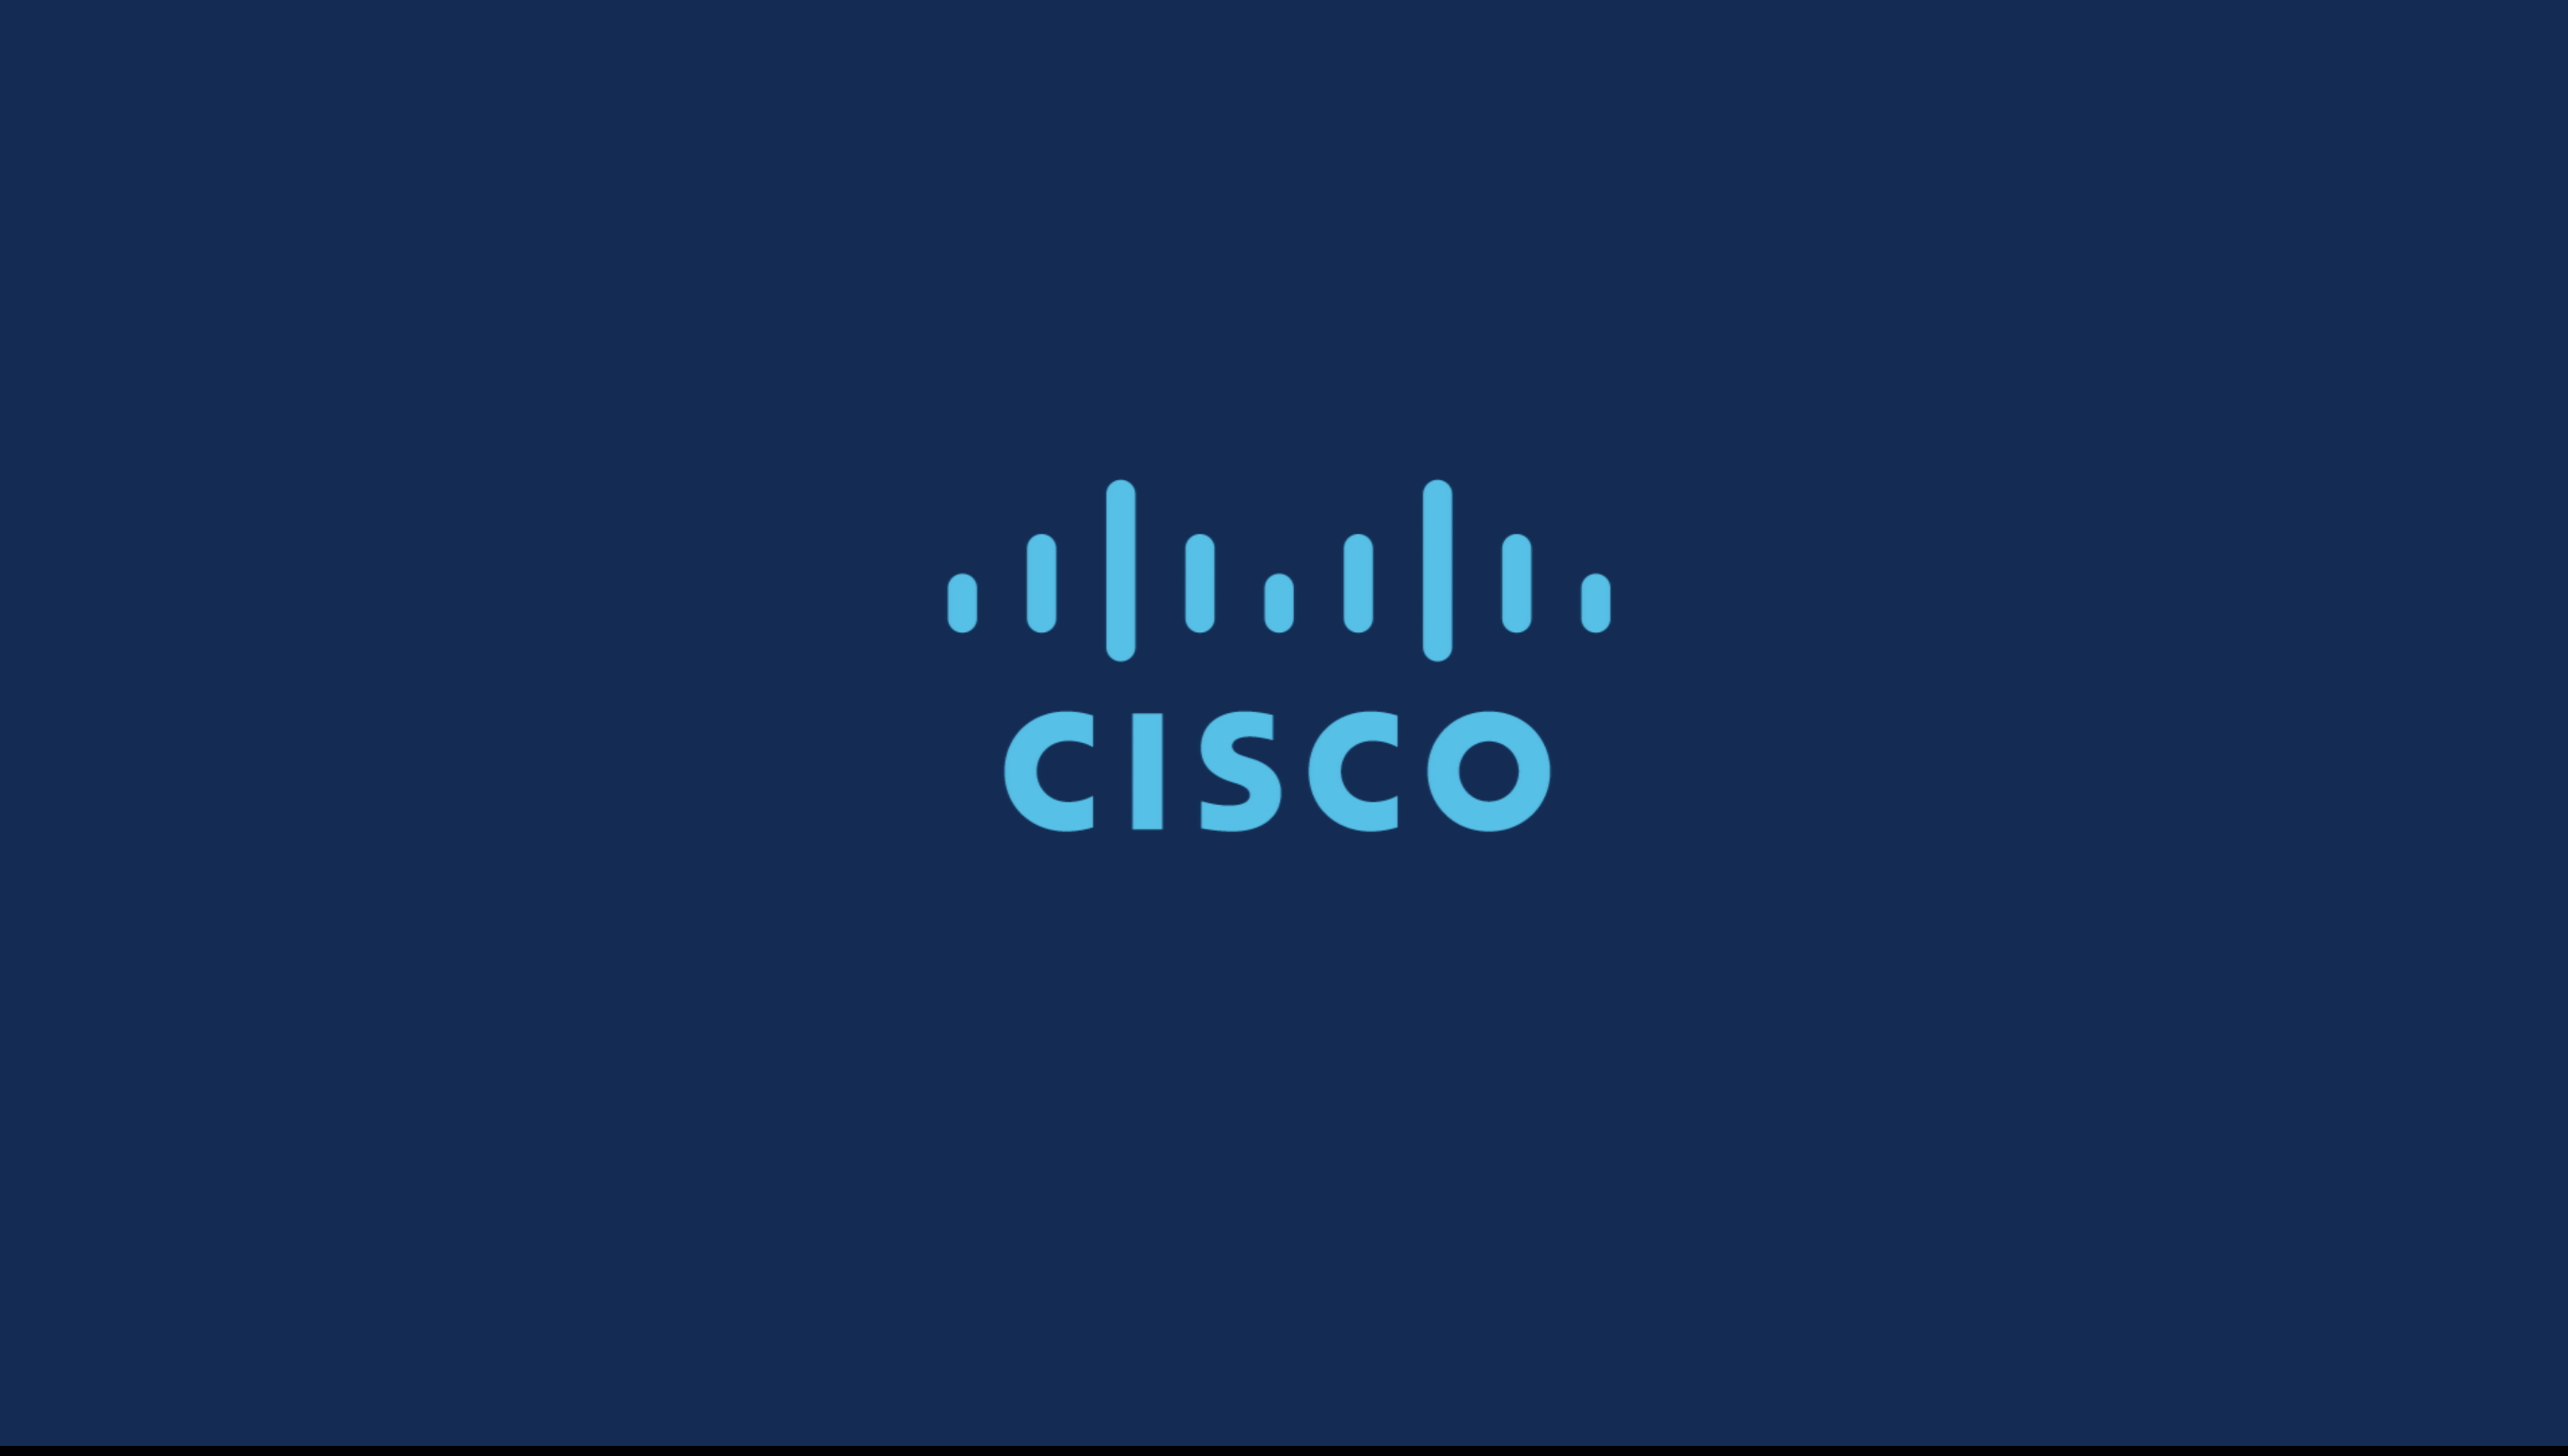 Furthering the AI-First Security Cloud: Cisco Announces Intent to Acquire Armorblox